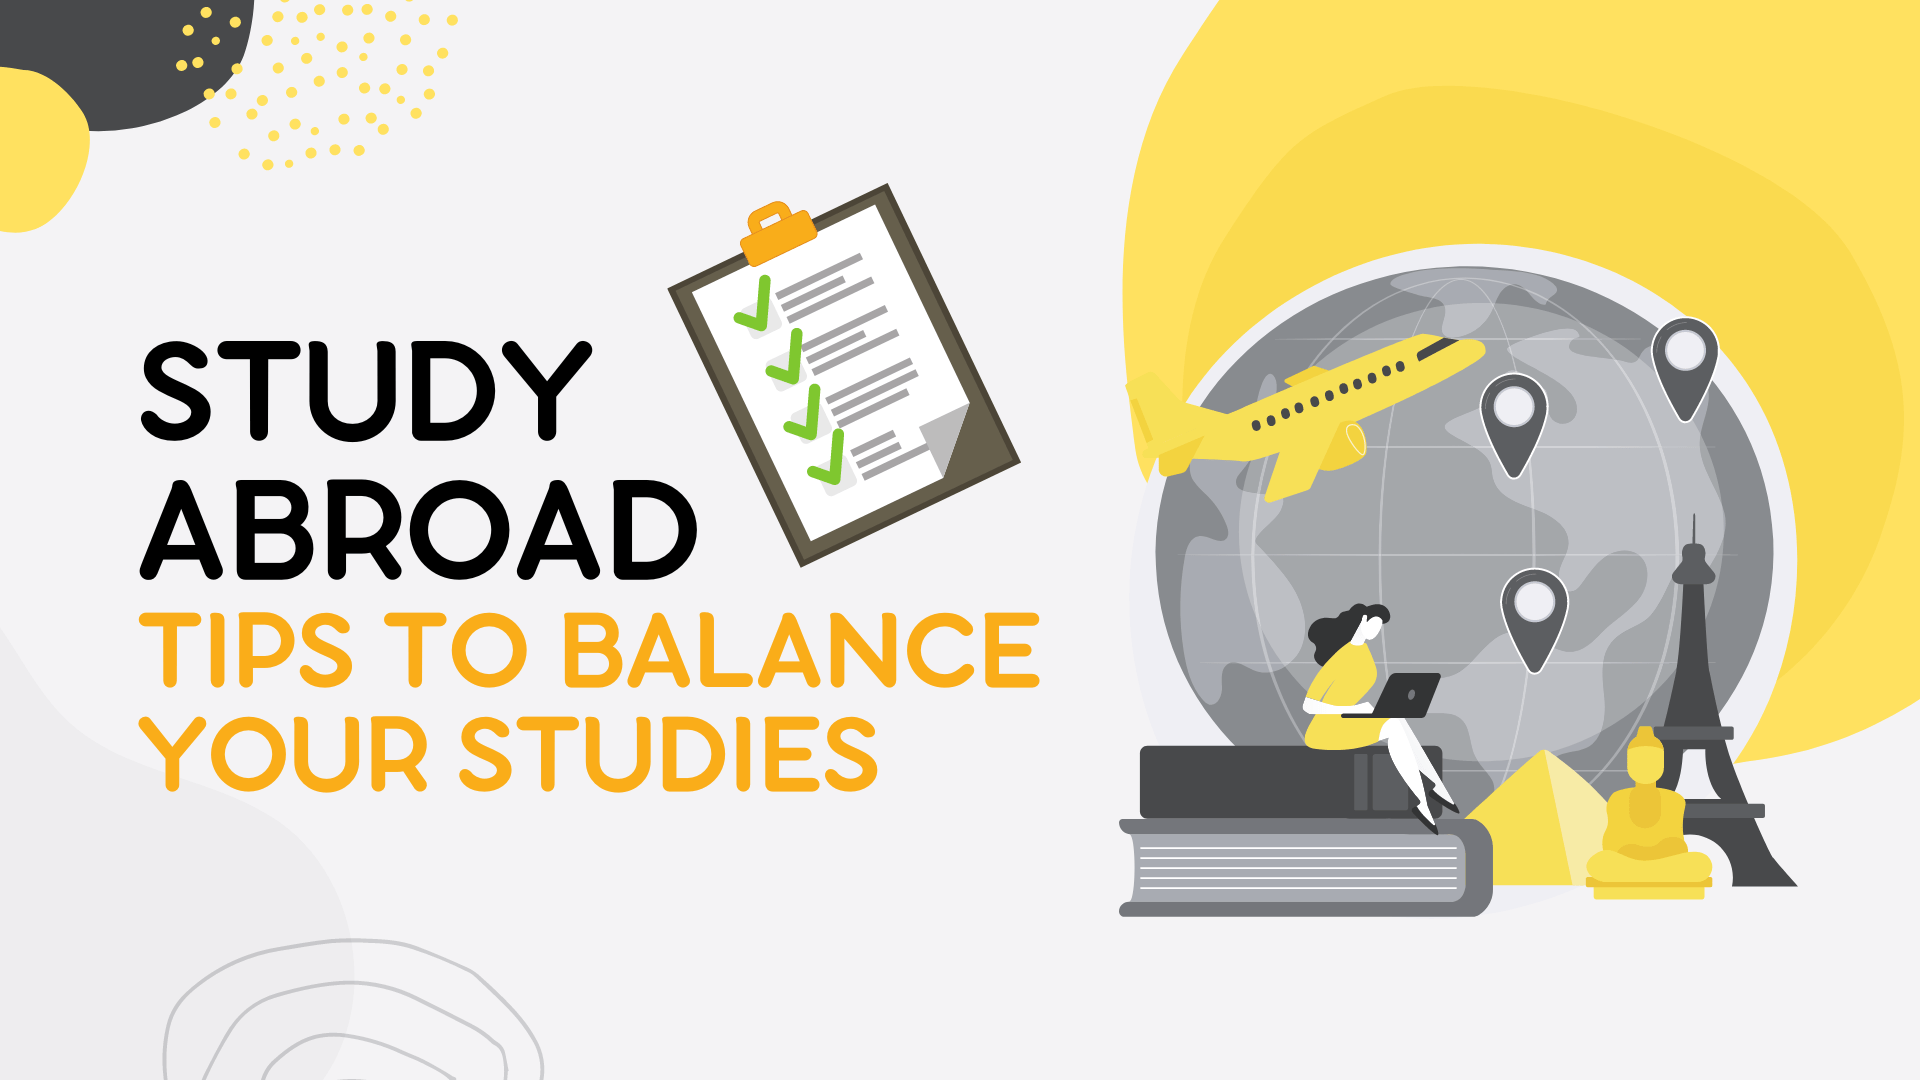 tips to balance your studies while studying abroad